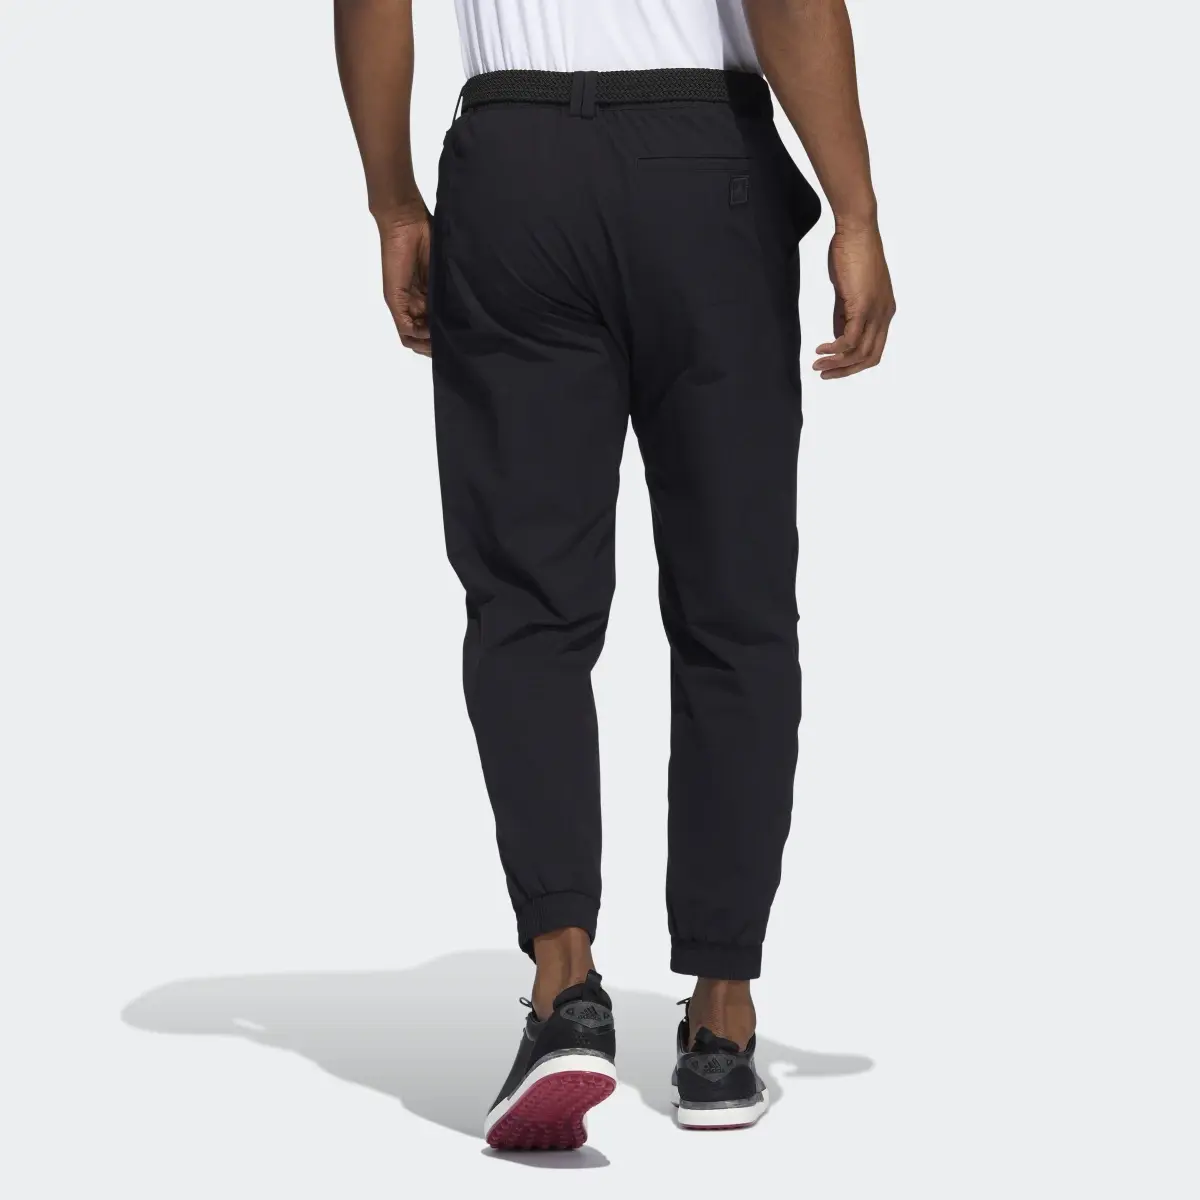 Adidas Go-To Commuter Pants. 2